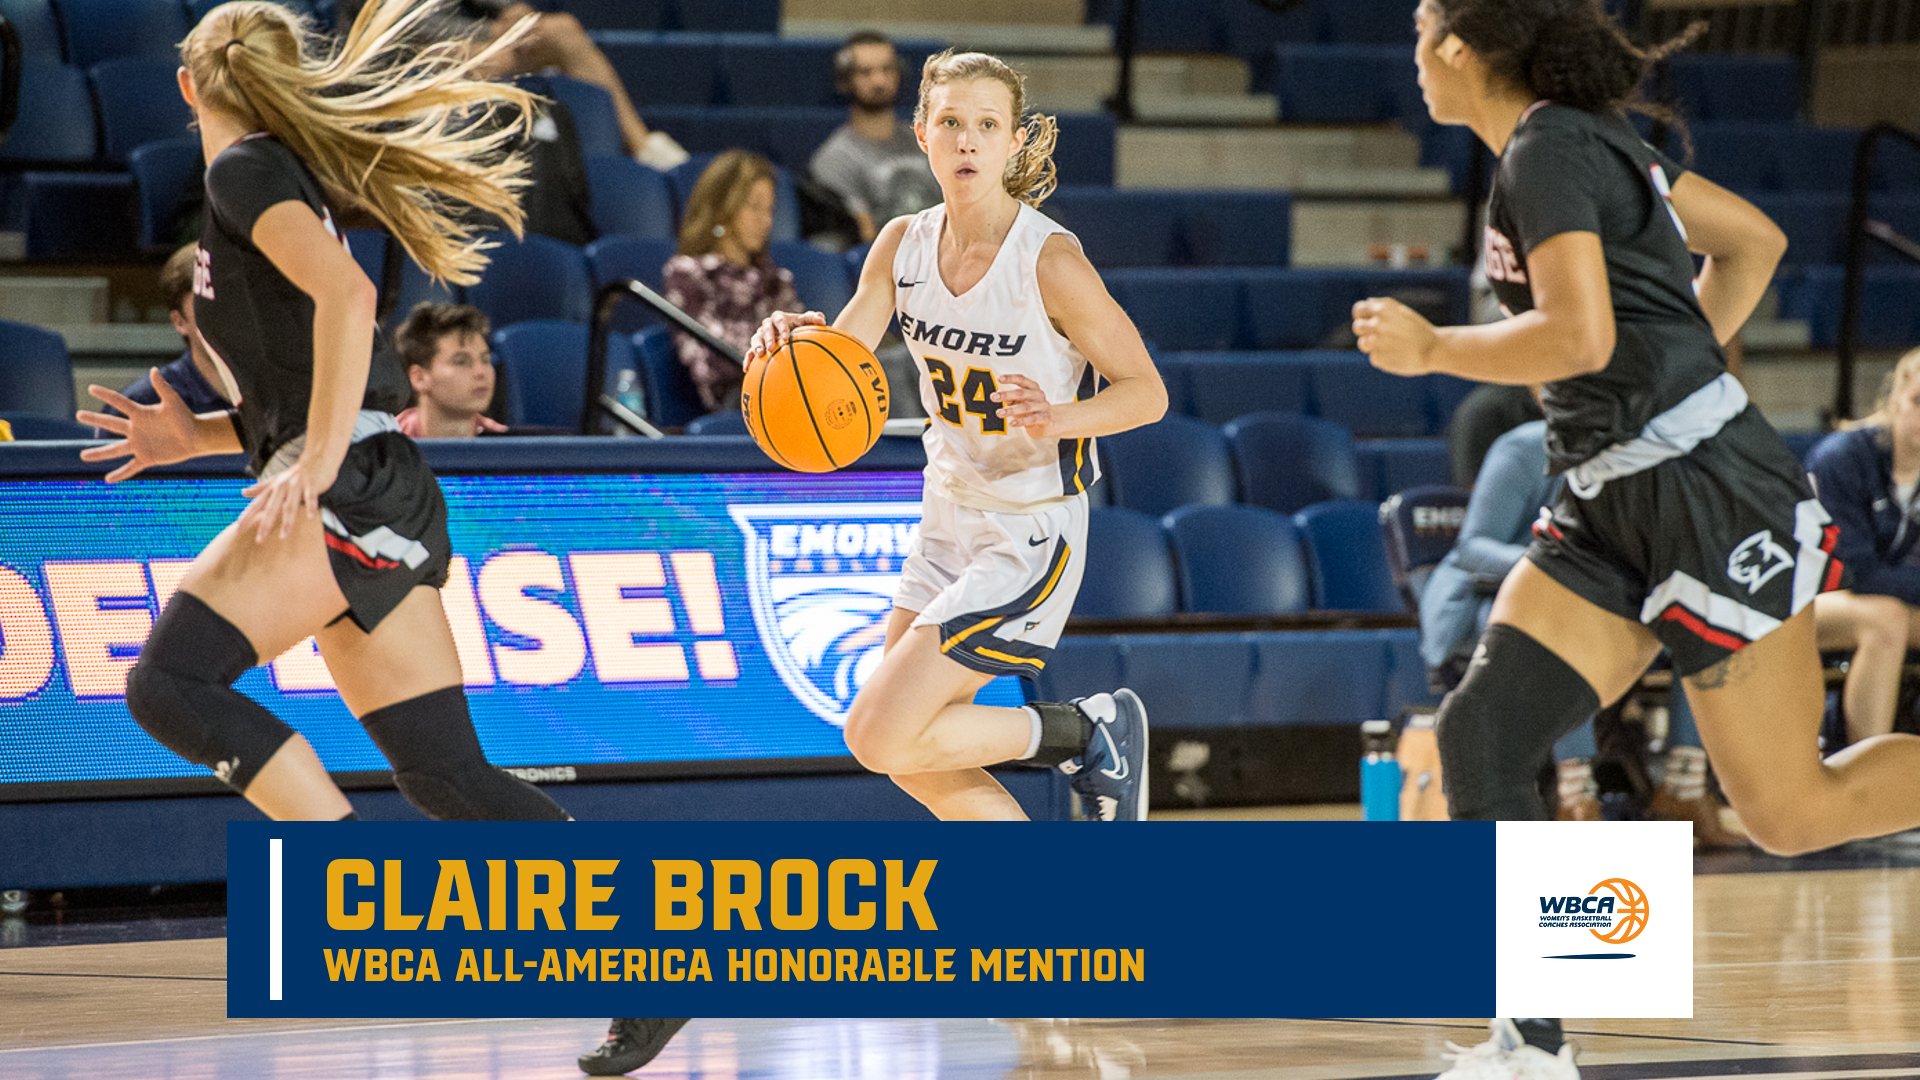 Accolades Continue for Claire Brock; Selected as WBCA All-America Honorable Mention